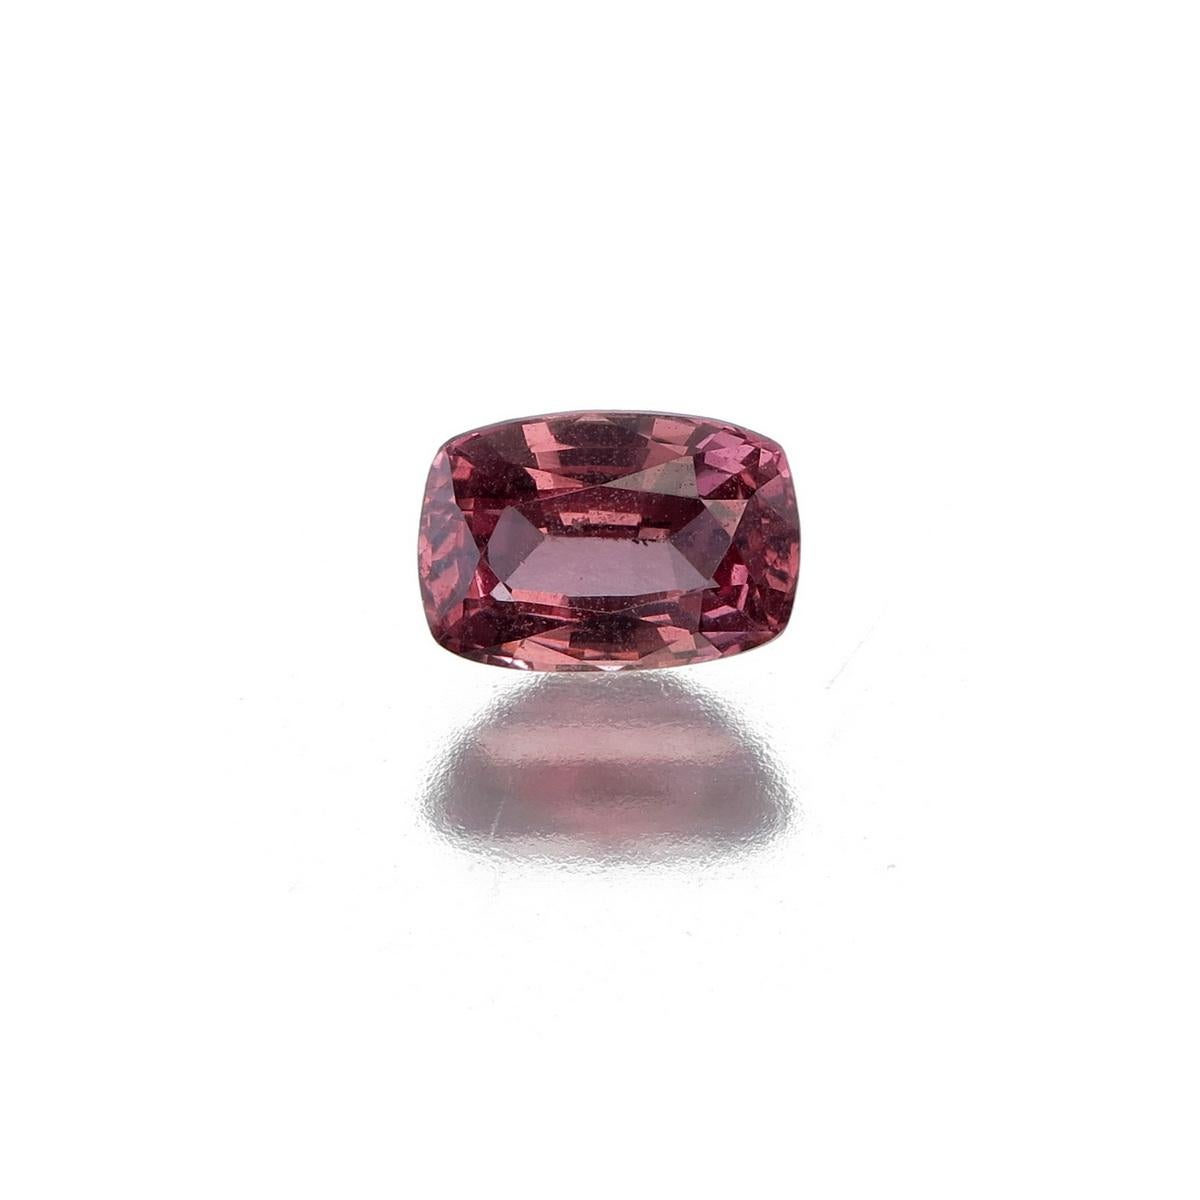 Women's or Men's 1.48 Carat Natural Pink Spinel from Burma For Sale